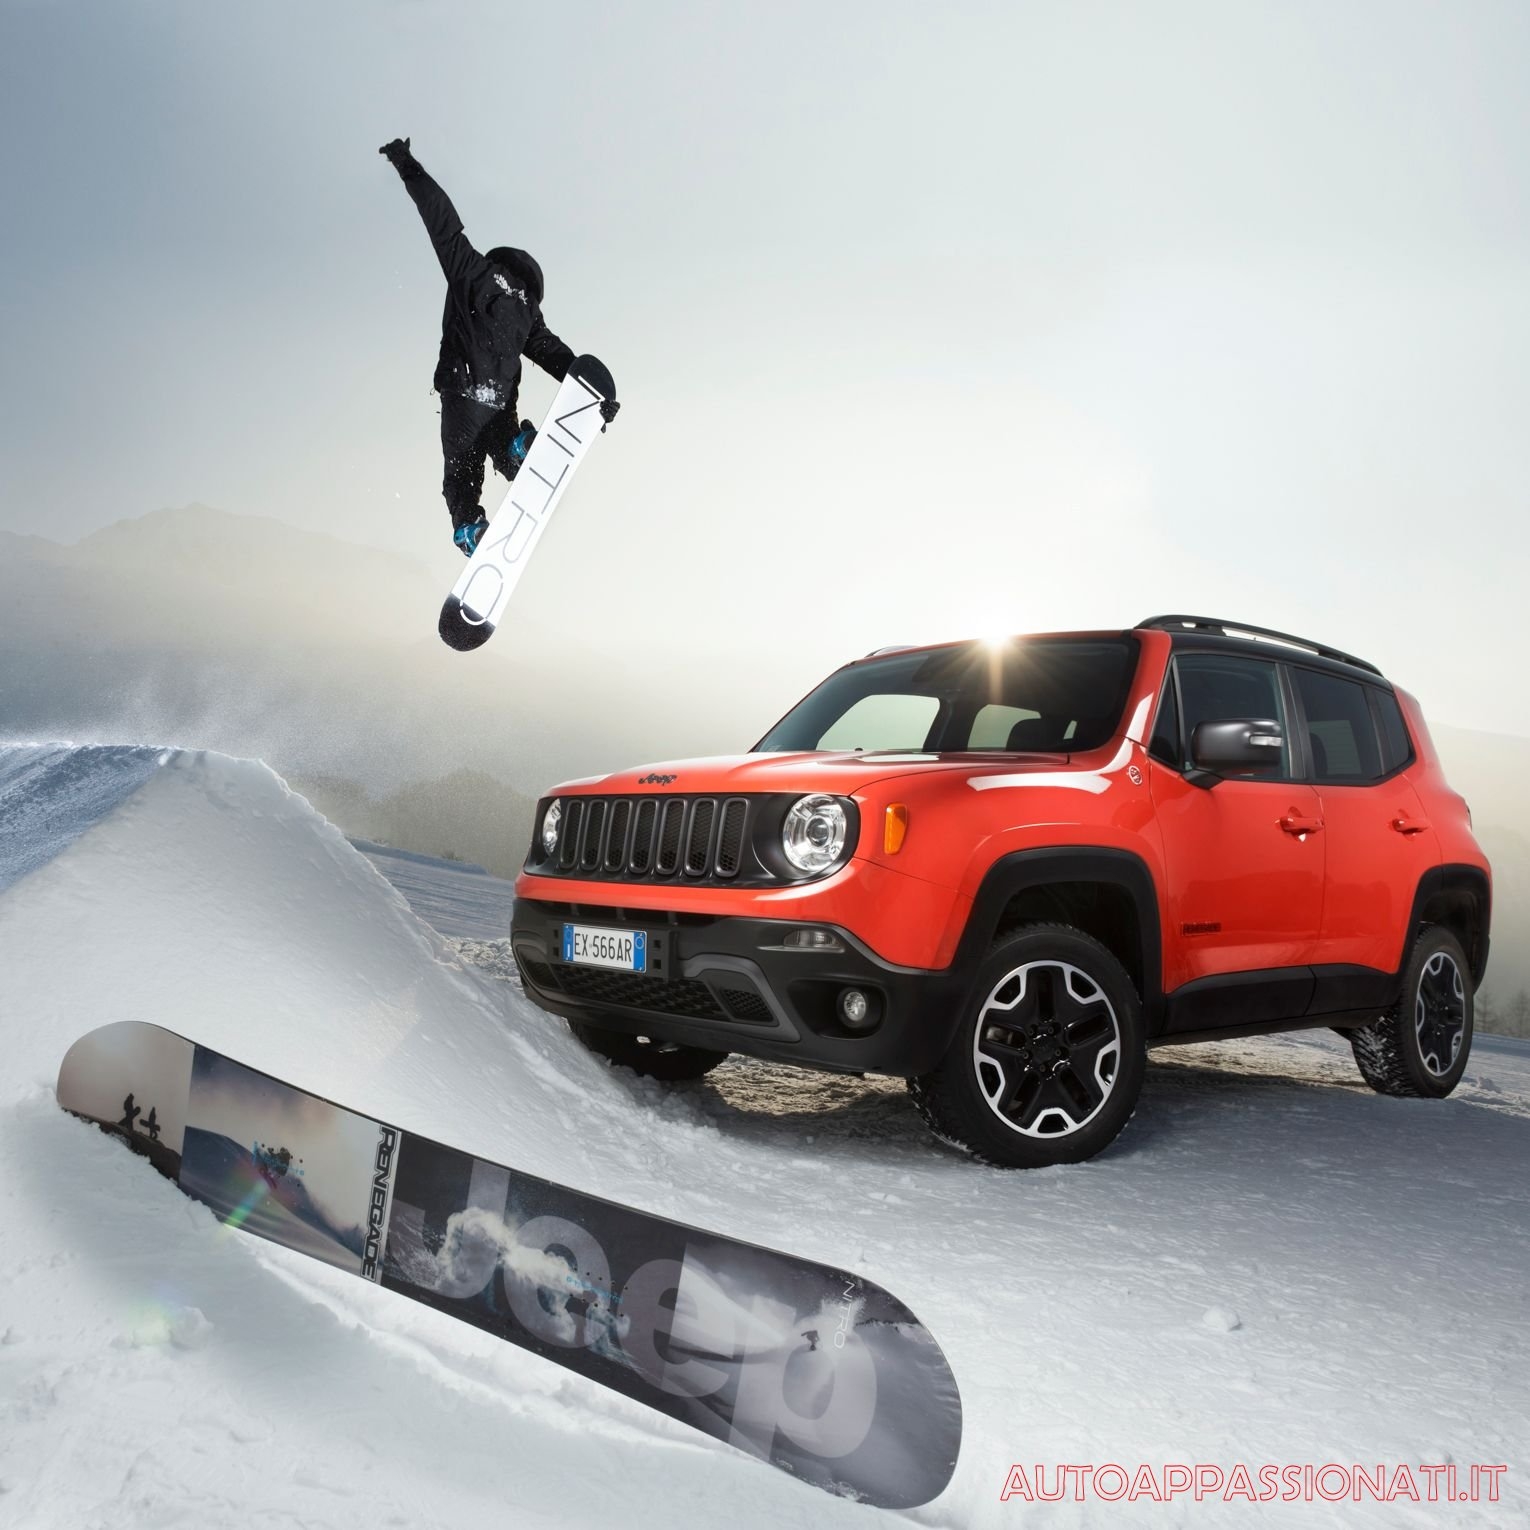 Jeep Renegade & Freestyle Snowboarders